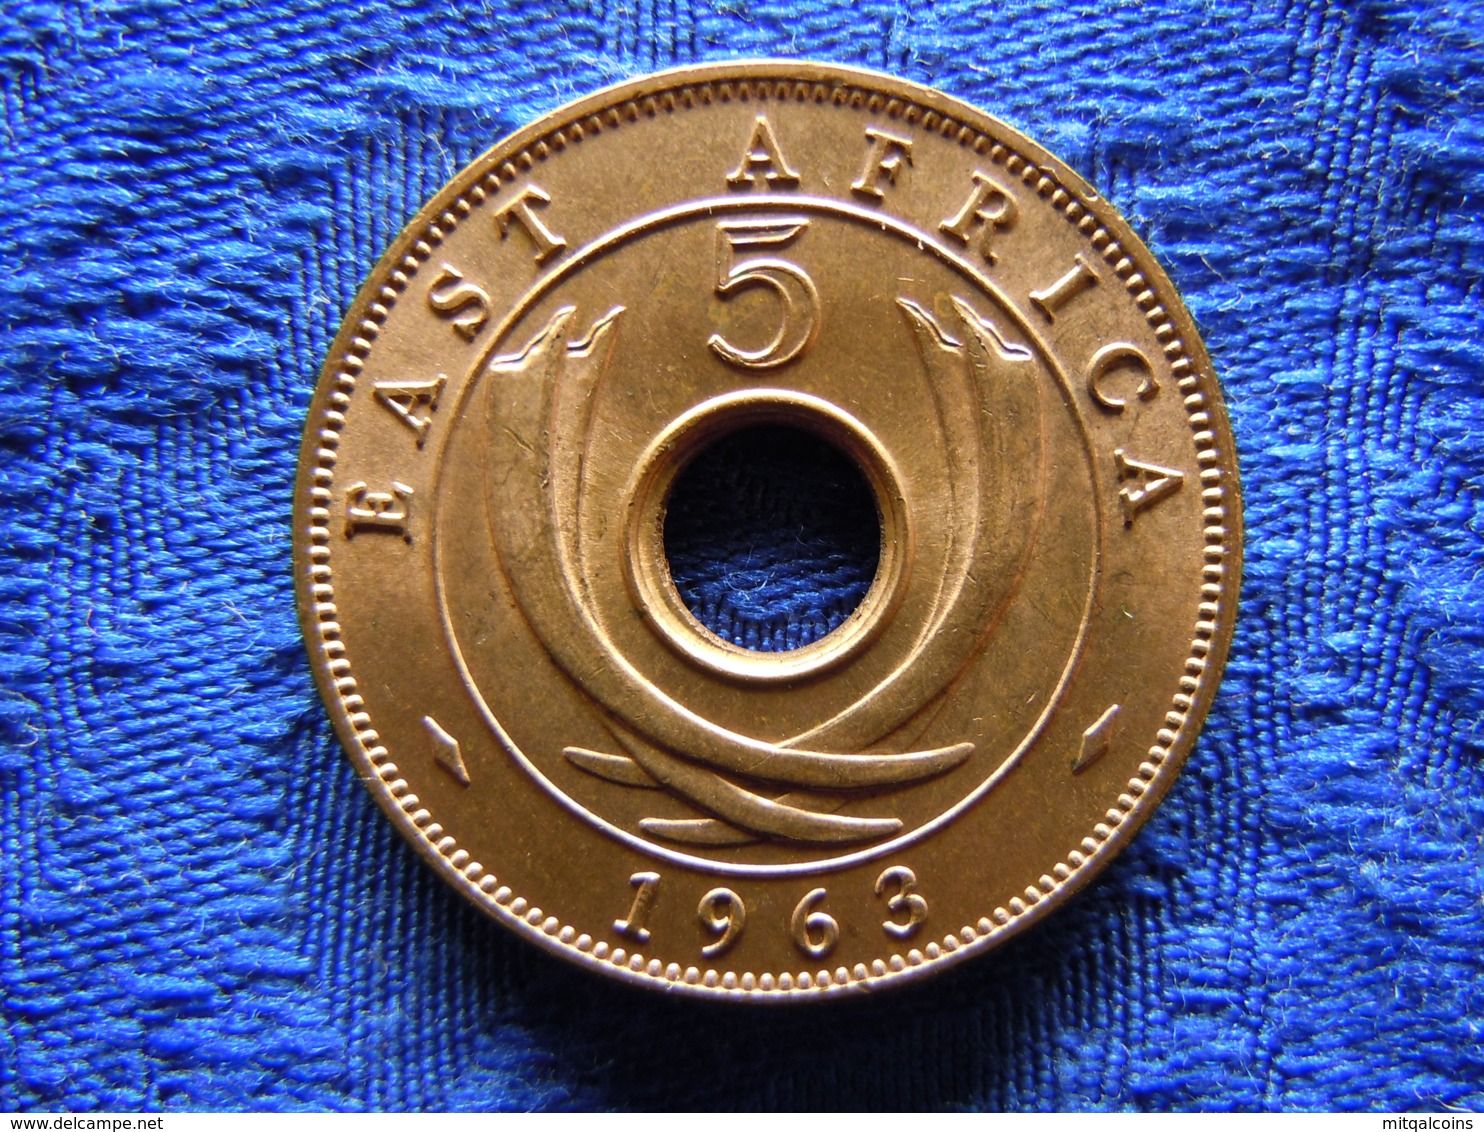 EAST AFRICA 5 CENTS 1963, KM37 AU - British Colony